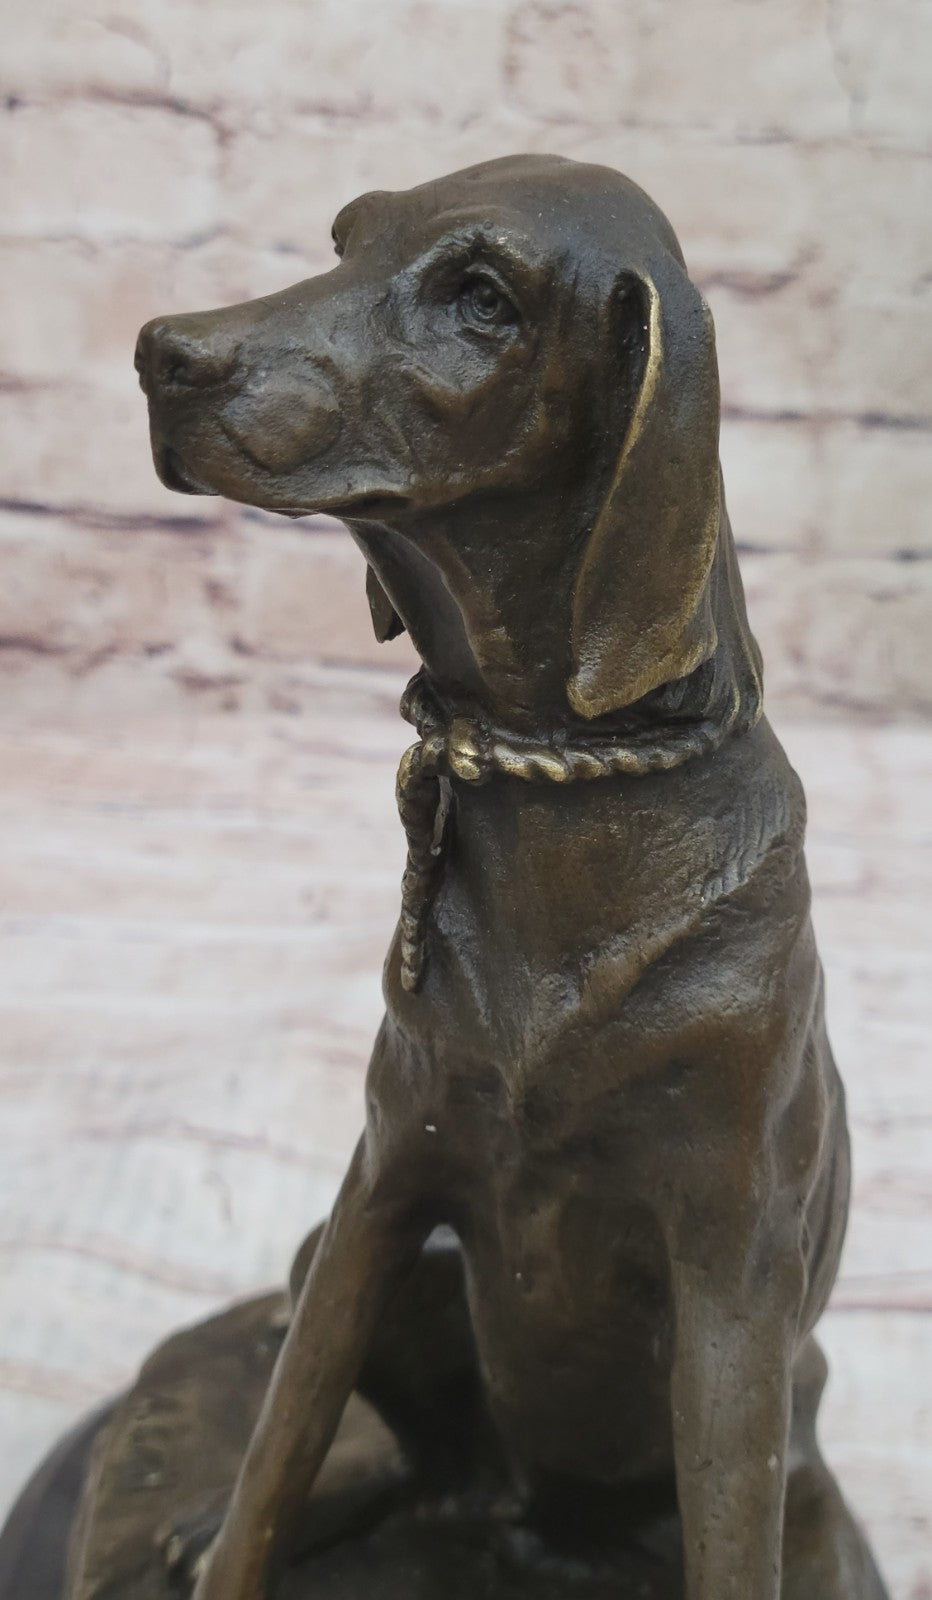 Vintage Bassett Hound Dog Figurine on Base Heavy Bronze  Made in Europe By Cail